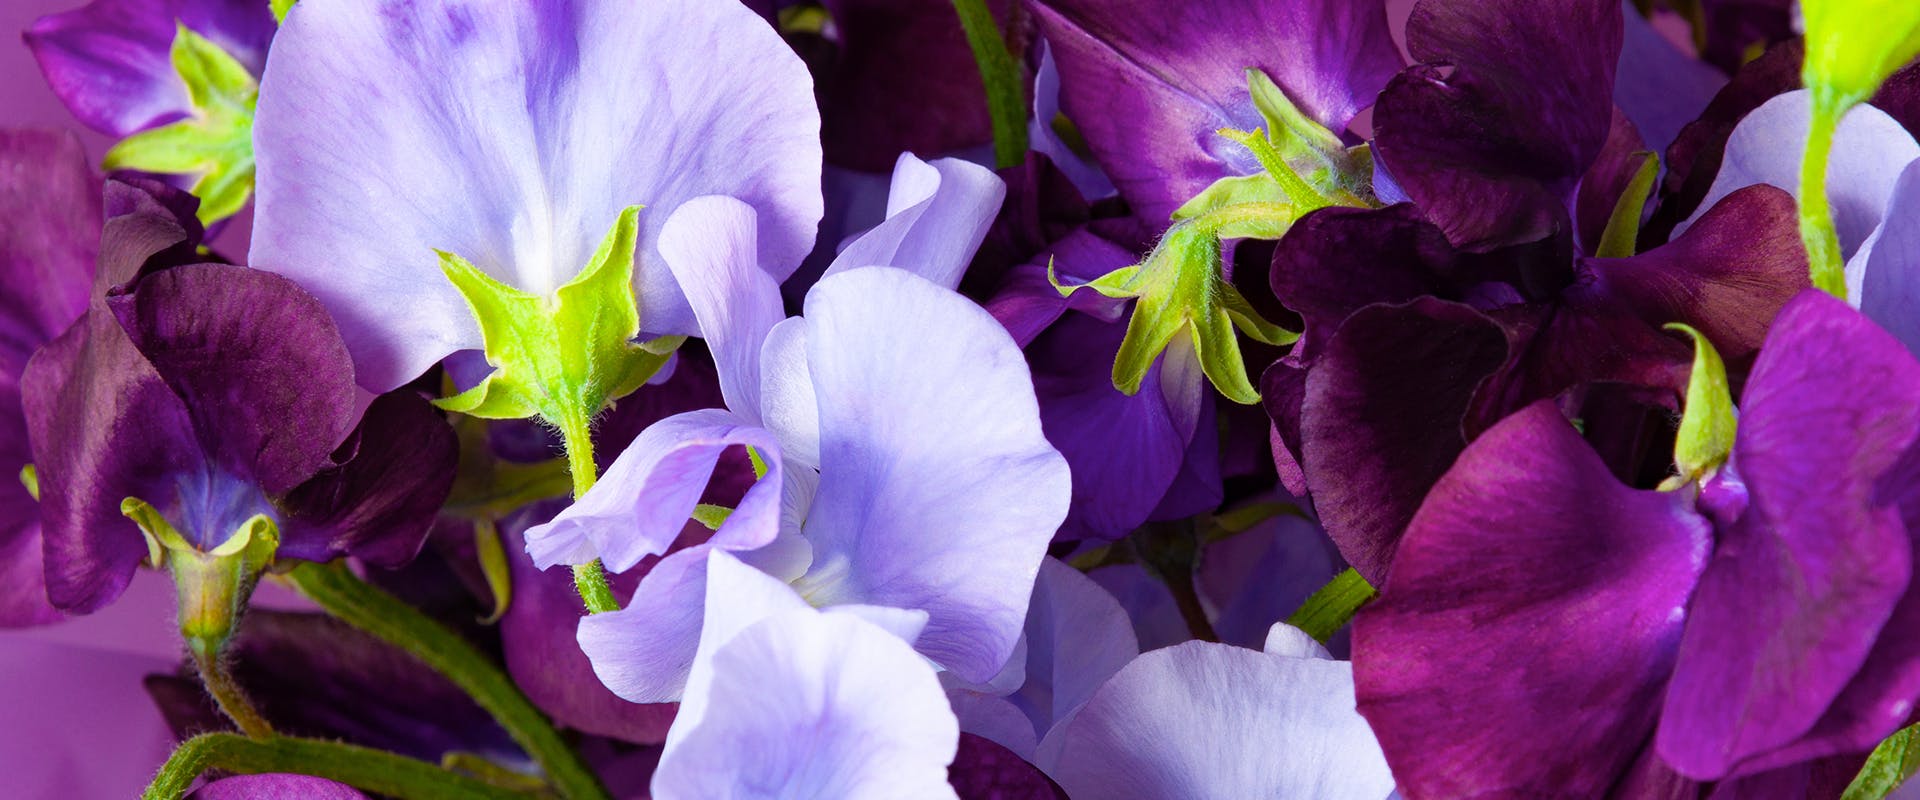 A close-up of a sweet pea plant